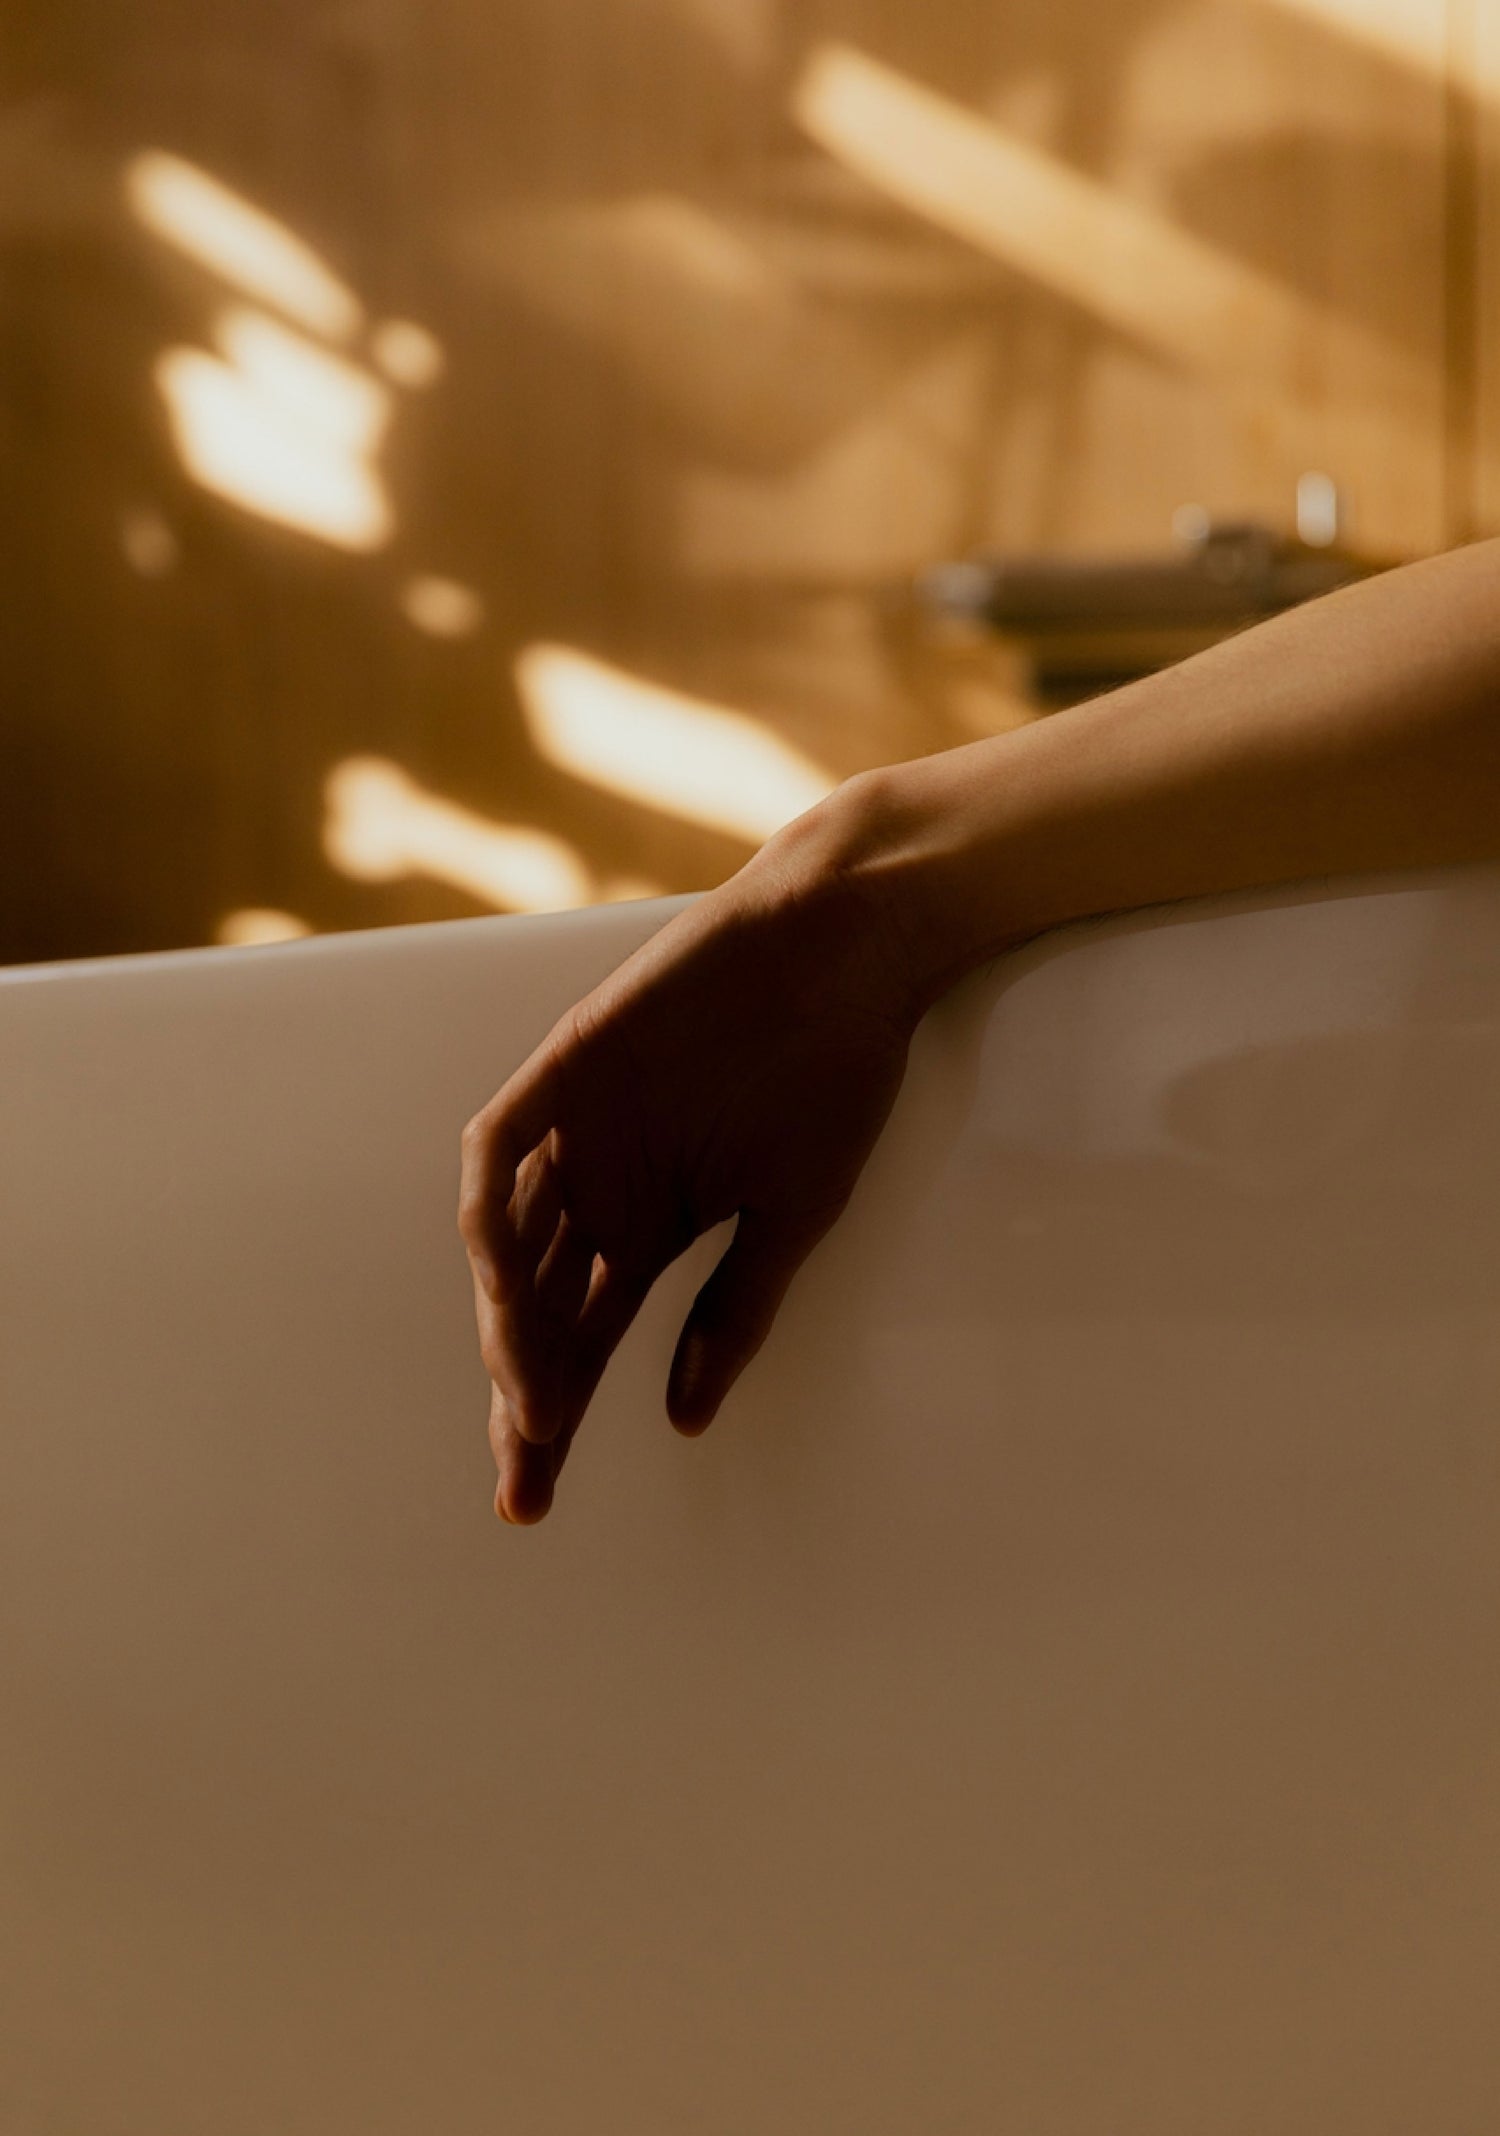 A hand hanging out of a bubble bath tub